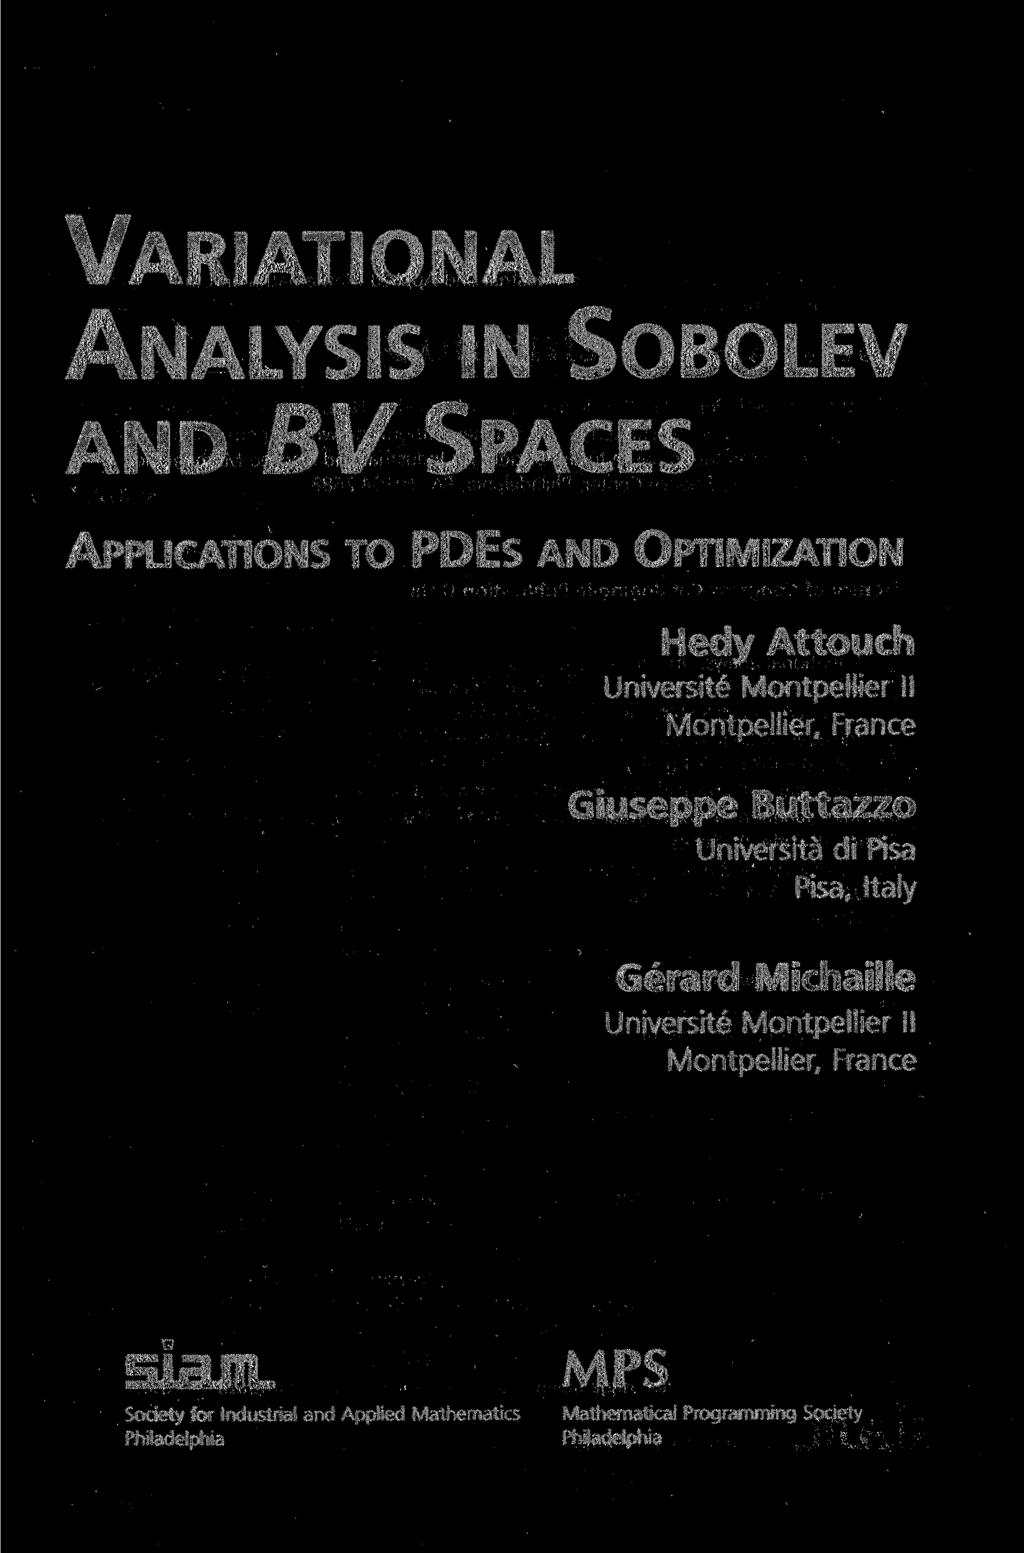 ж ш Л Fi I /V T I Jf"\ Ik 1 Л 1 ANALYSIS IN SOBOLEV AND BV SPACES APPLICATIONS TO PDES AND OPTIMIZATION Hedy Attouch Universite Montpellier I!